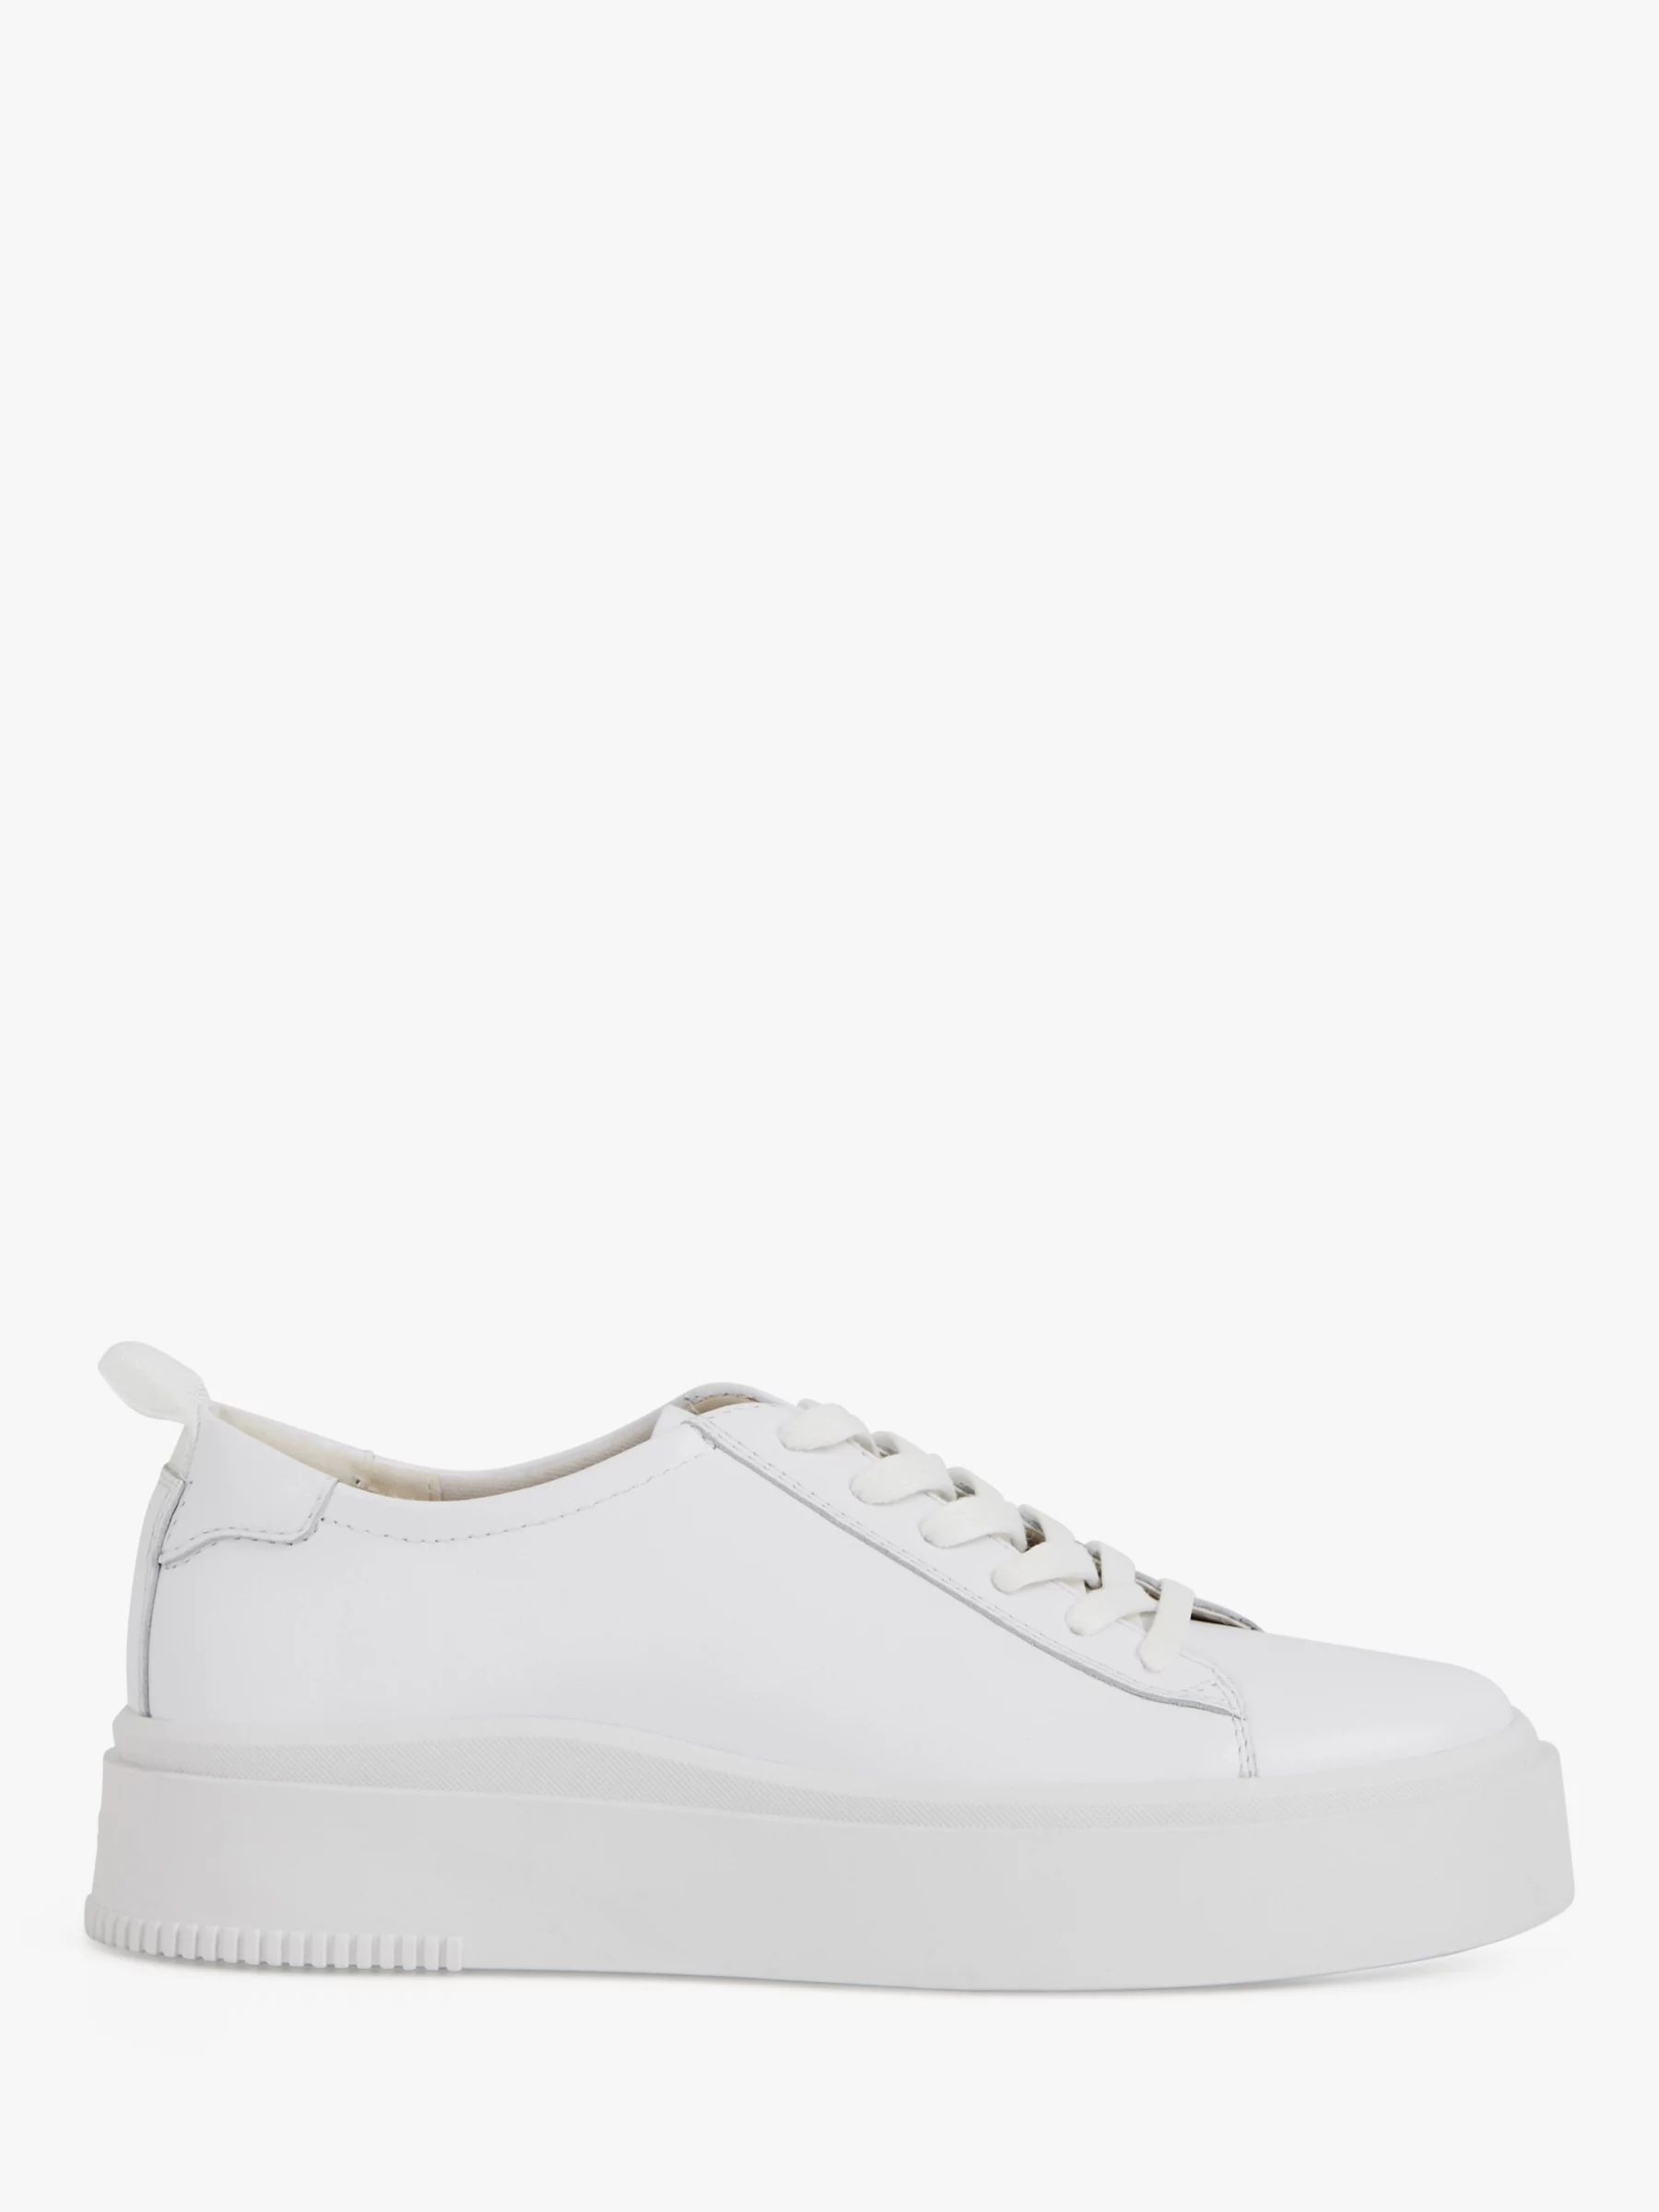 Vagabond Shoemakers Stacy Leather Trainers, White | John Lewis (UK)